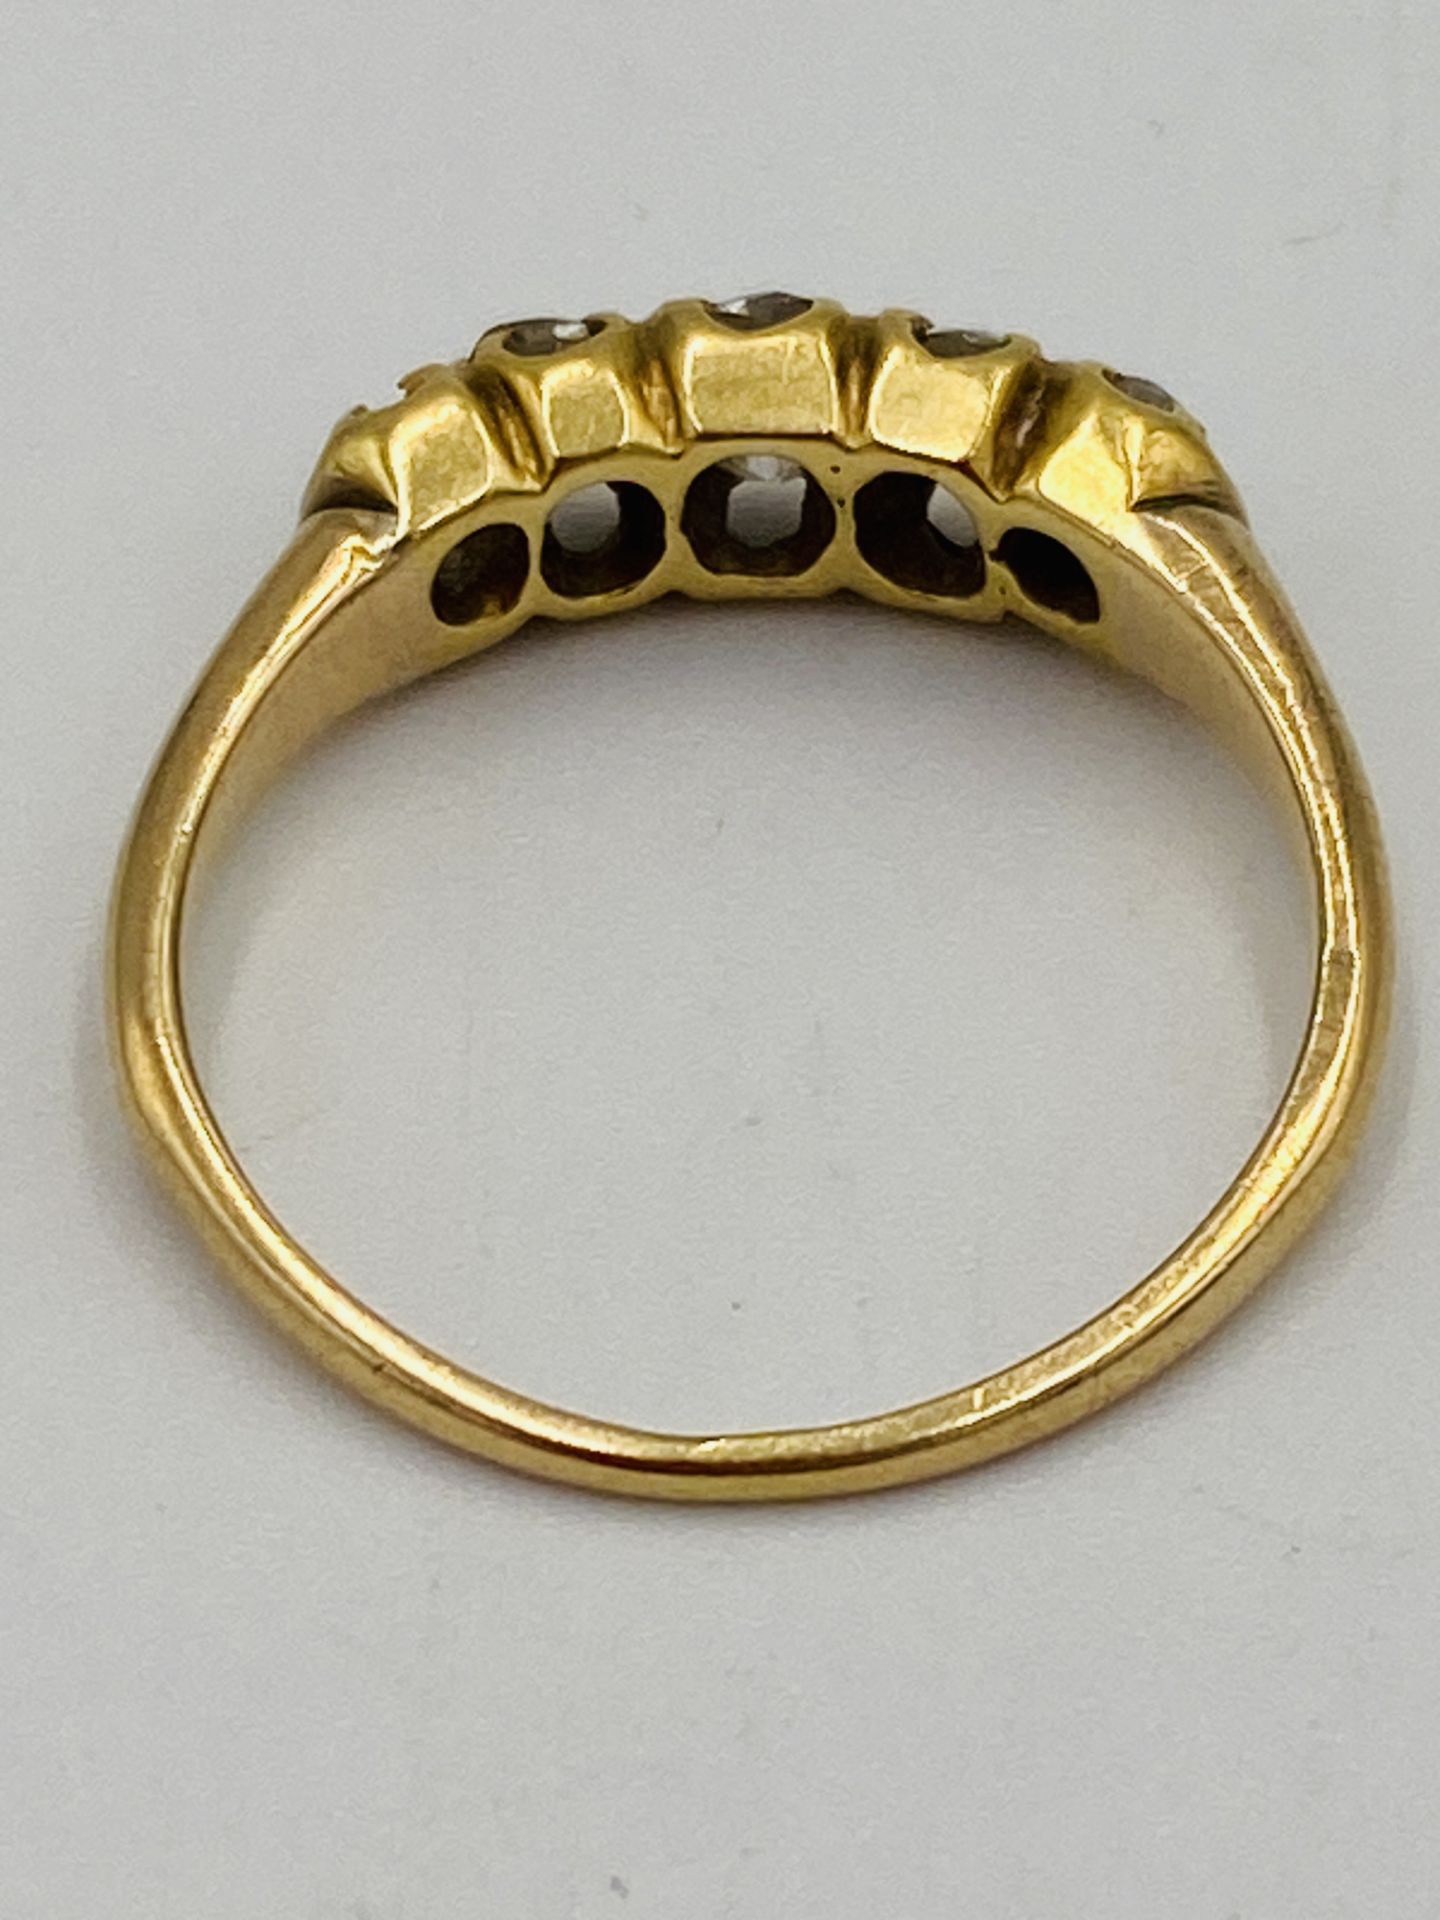 Gold ring set with four diamonds - Image 2 of 6